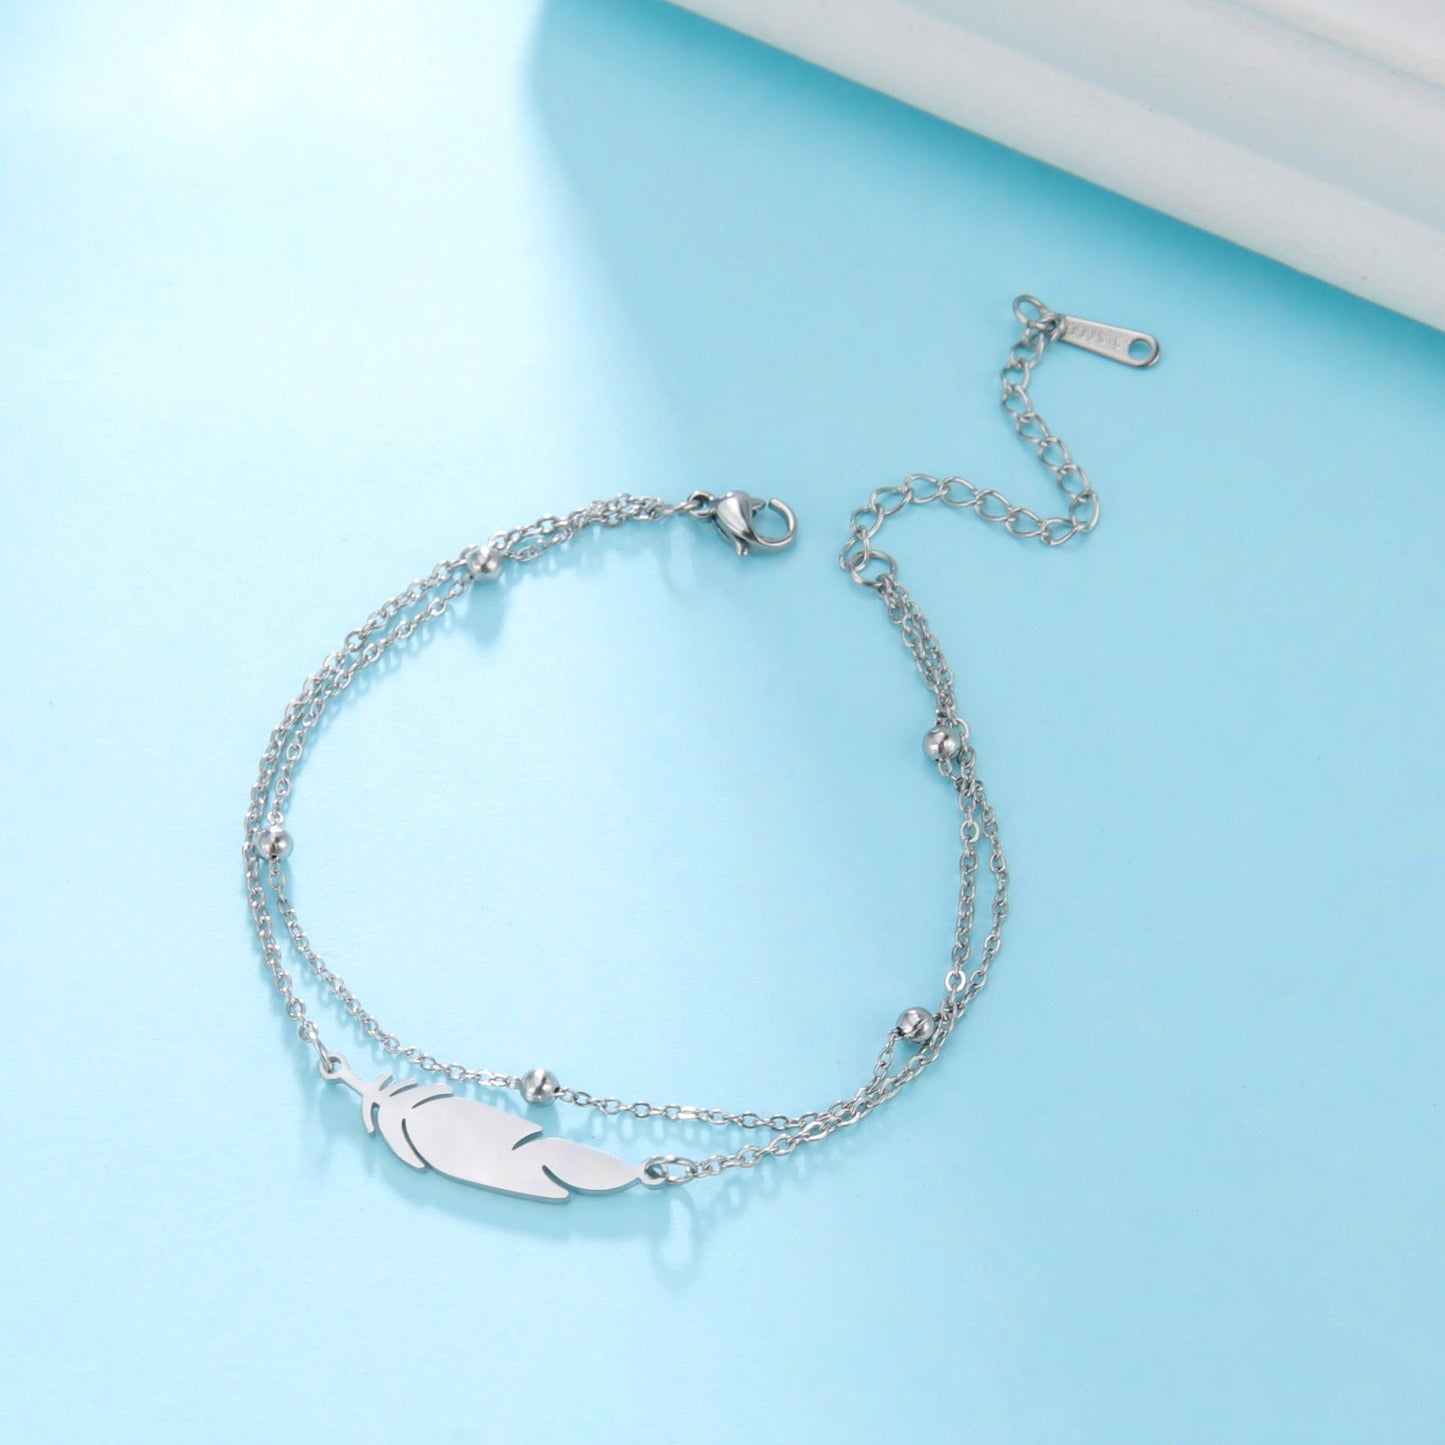 Trendy Anklet - M&H FashionTrendy AnkletM&H FashionM&H Fashion200001034:361180#Silver colorSilver colorTrendy AnkletM&H FashionM&H FashionThis Trendy Anklet is the perfect accessory for any outfit. It features a feather and double chain design, made from stainless steel and metal. The length is 21cm+5cTrendy Anklet